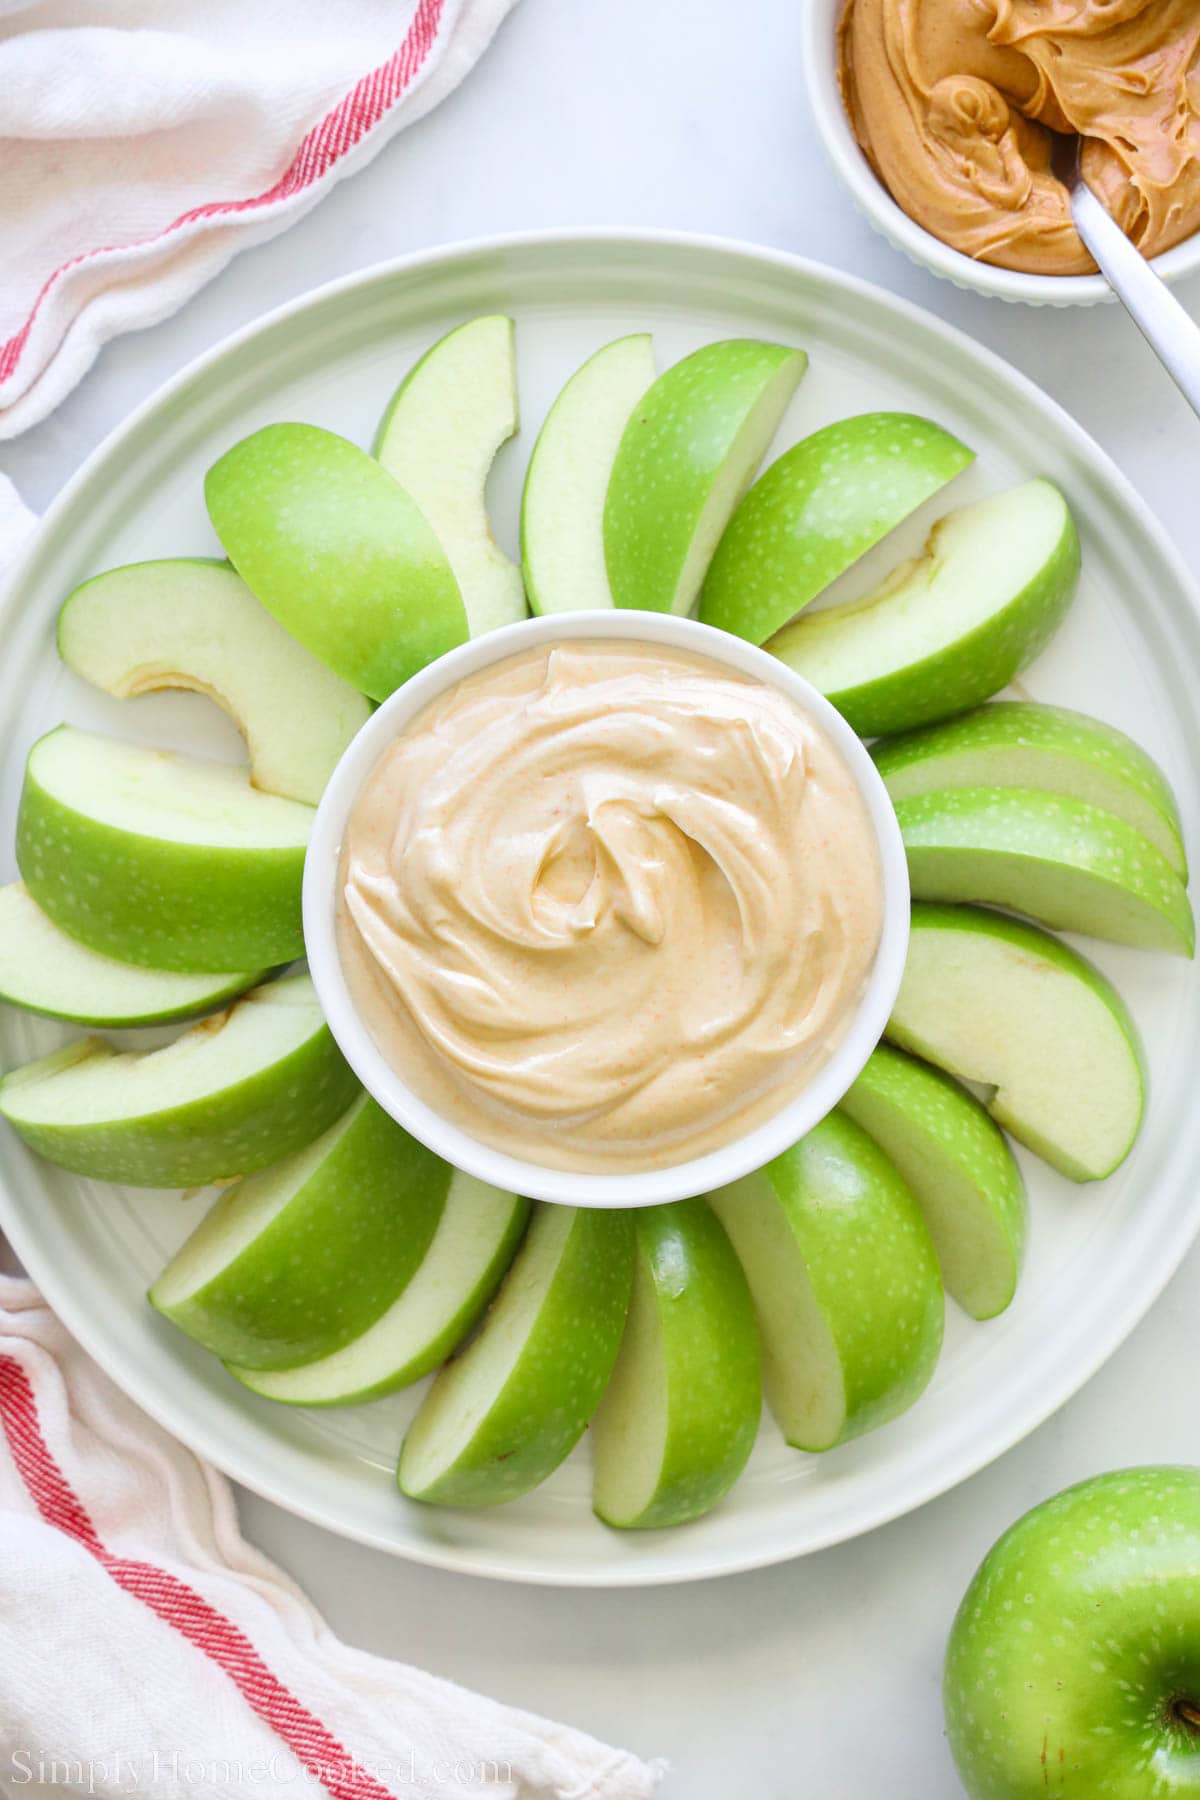 Peanut Butter Yogurt Dip in the center of apple slices with peanut butter nearby.